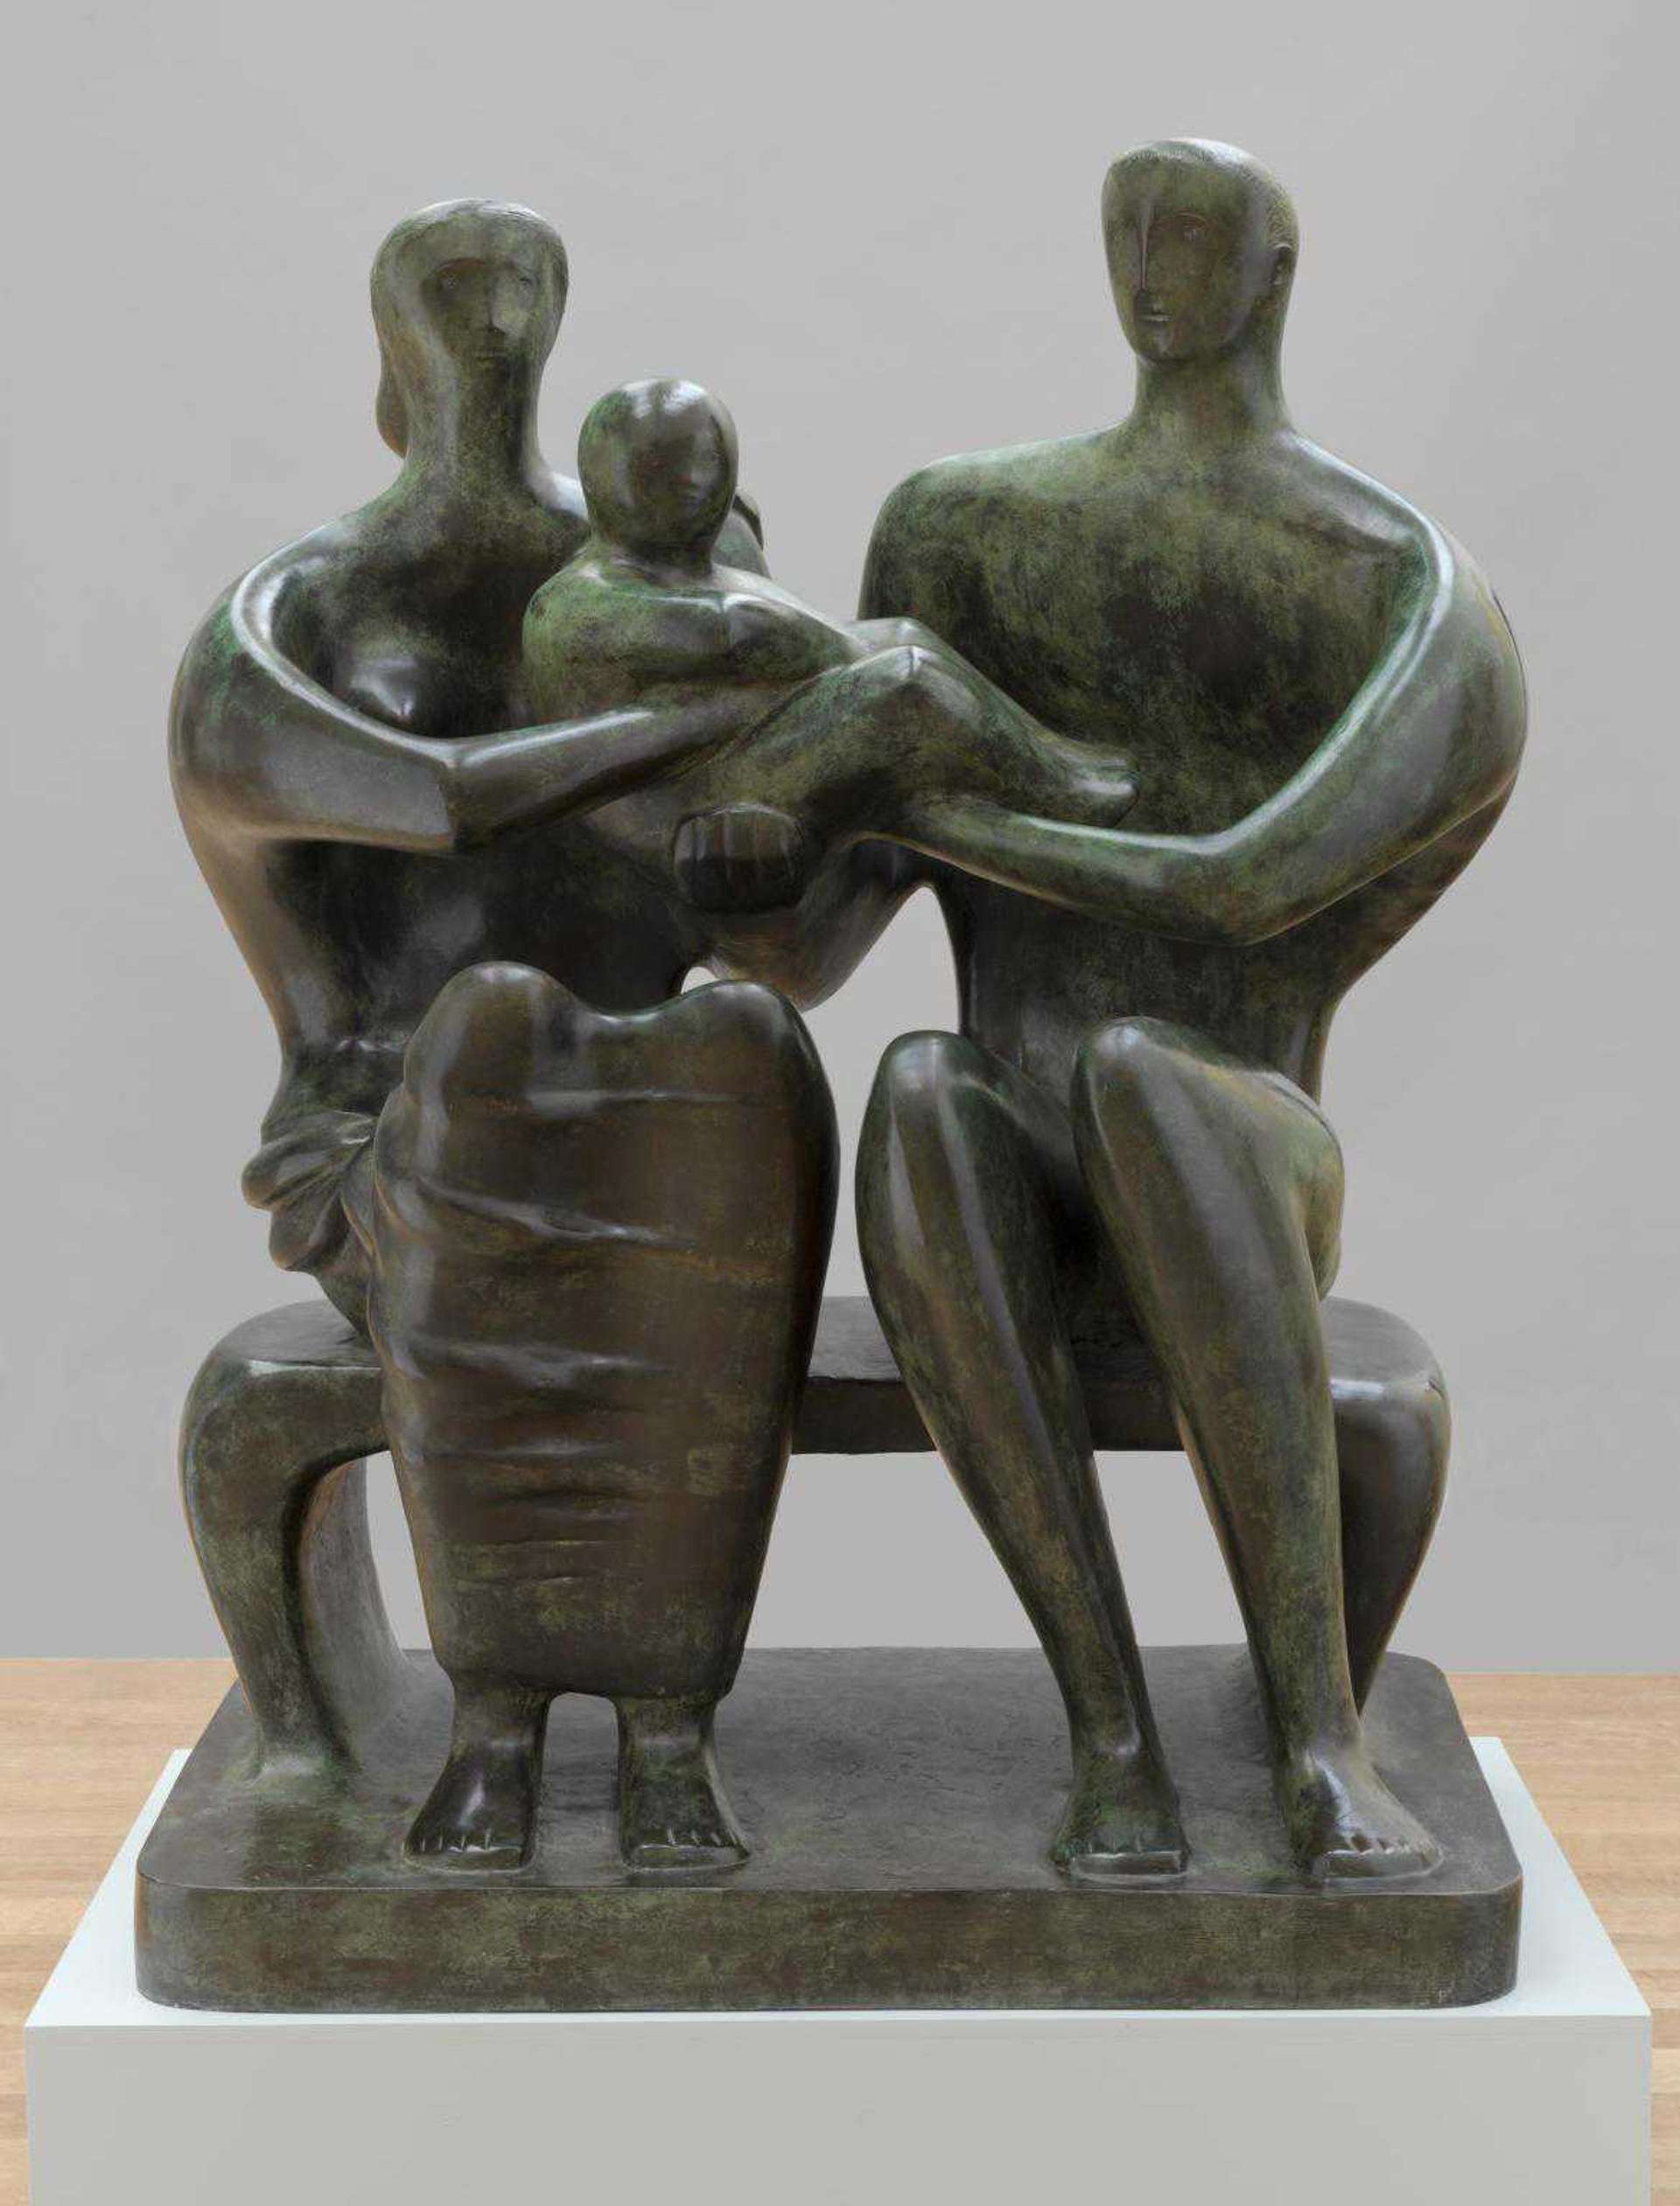 Sculpture depicting three figures, two seated and one being held, representing a family bond.